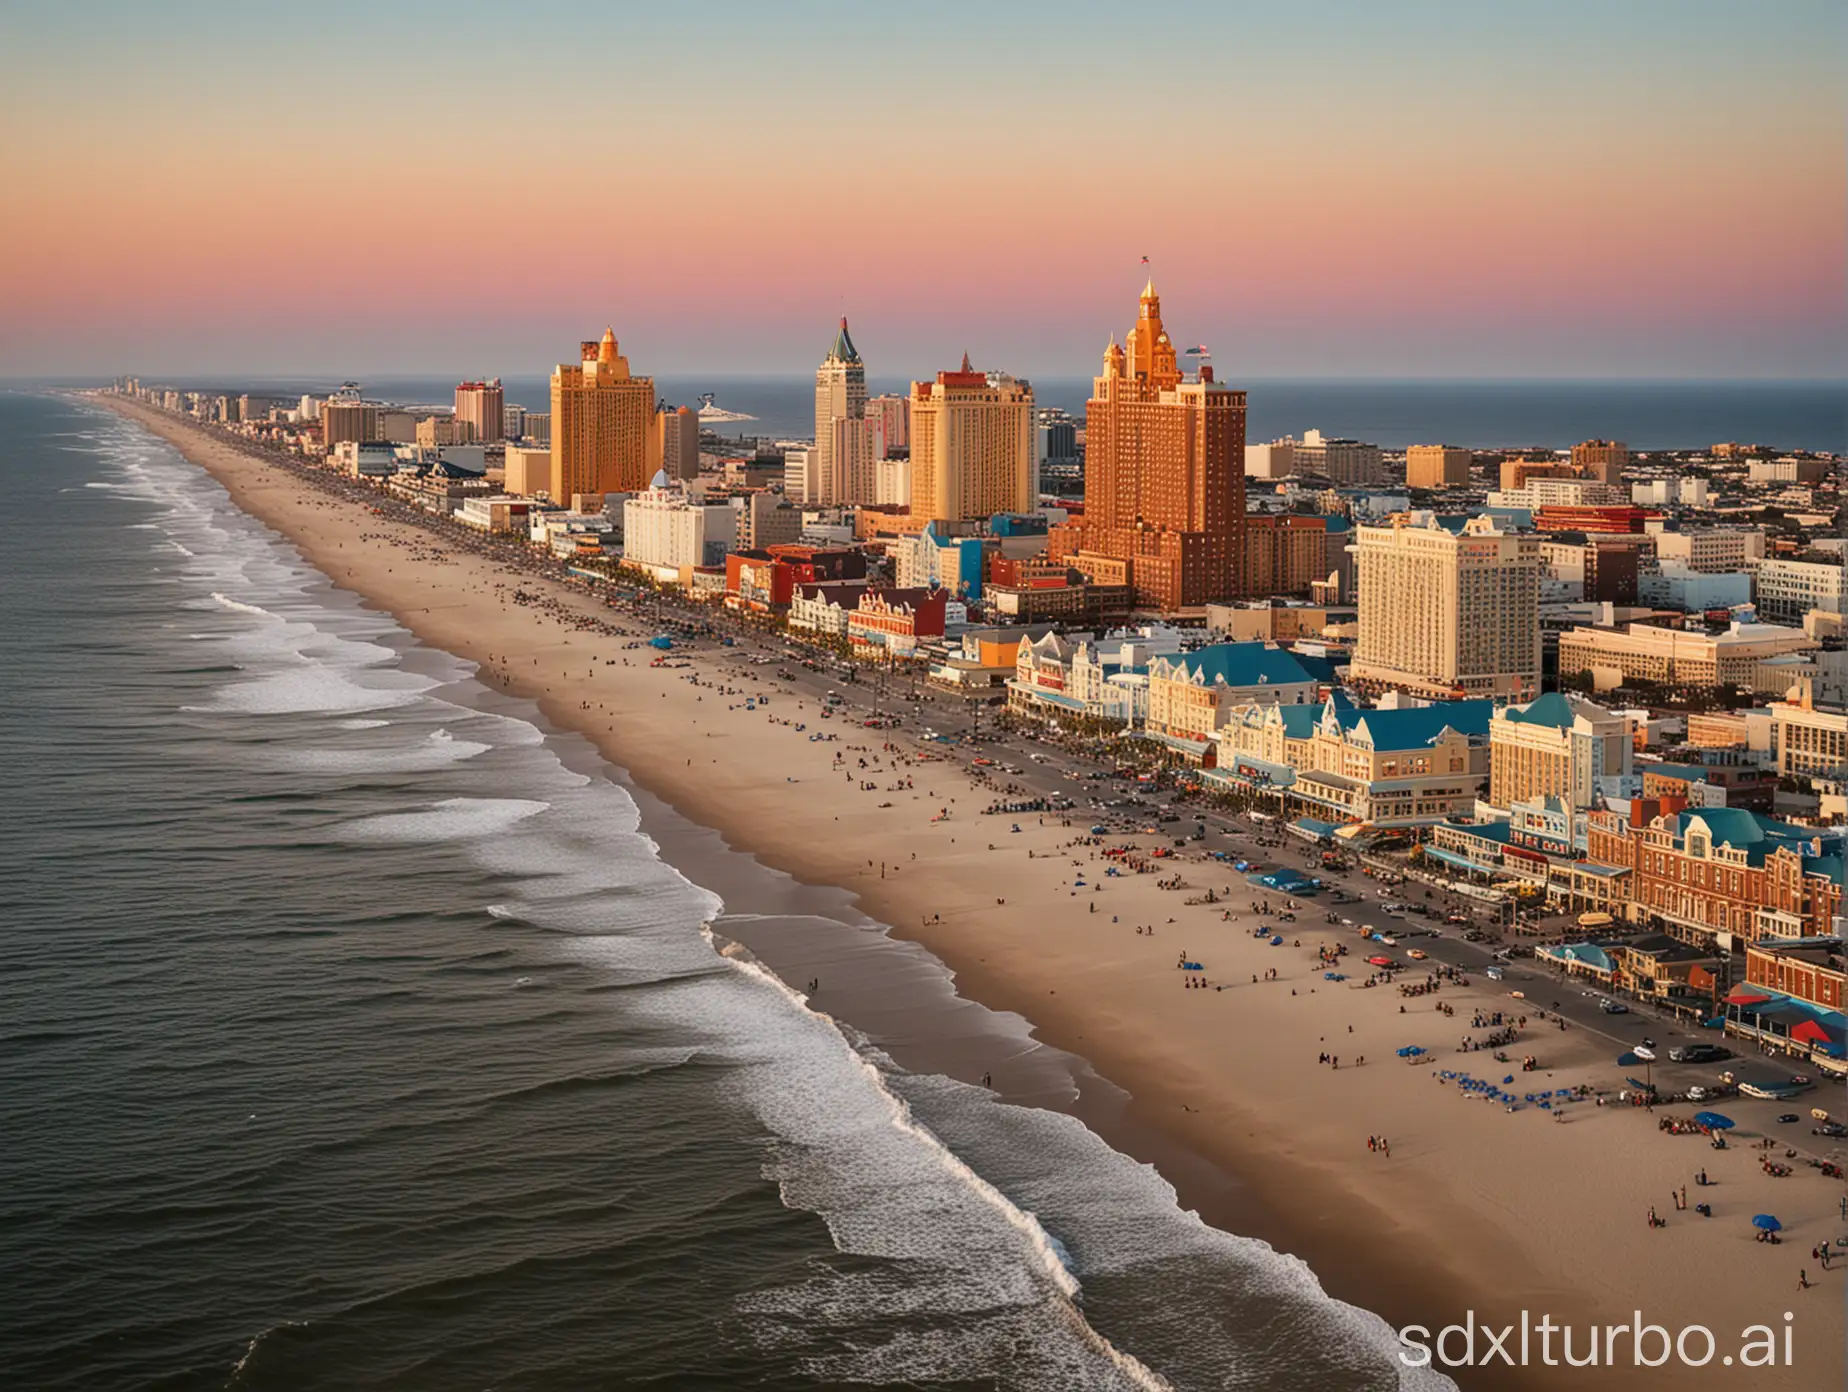 Aerial view of Atlantic City, New Jersey, USA. Time of Day: Sunset, with warm, golden hues illuminating the scene. Sky: Clear with a few wispy clouds, transitioning from blue near the horizon to shades of orange and pink overhead. Ocean: The Atlantic Ocean, shimmering with reflections of the setting sun, exhibiting varying shades of blue from deep navy to turquoise near the shore. Beach: A wide sandy beach extending along the shoreline, with gentle waves lapping against it. Boardwalk: A bustling boardwalk running parallel to the beach, lined with colorful shops, restaurants, and casinos. Buildings: Tall, modern buildings interspersed with iconic landmarks like the Steel Pier and the Atlantic City Convention Center. Lights: Bright neon lights adorning the buildings and casinos, creating a vibrant and lively atmosphere. People: Diverse crowds of people strolling along the boardwalk, enjoying the evening, some carrying balloons and cotton candy. Landmarks: Include the Trump Taj Mahal (now Hard Rock Hotel).